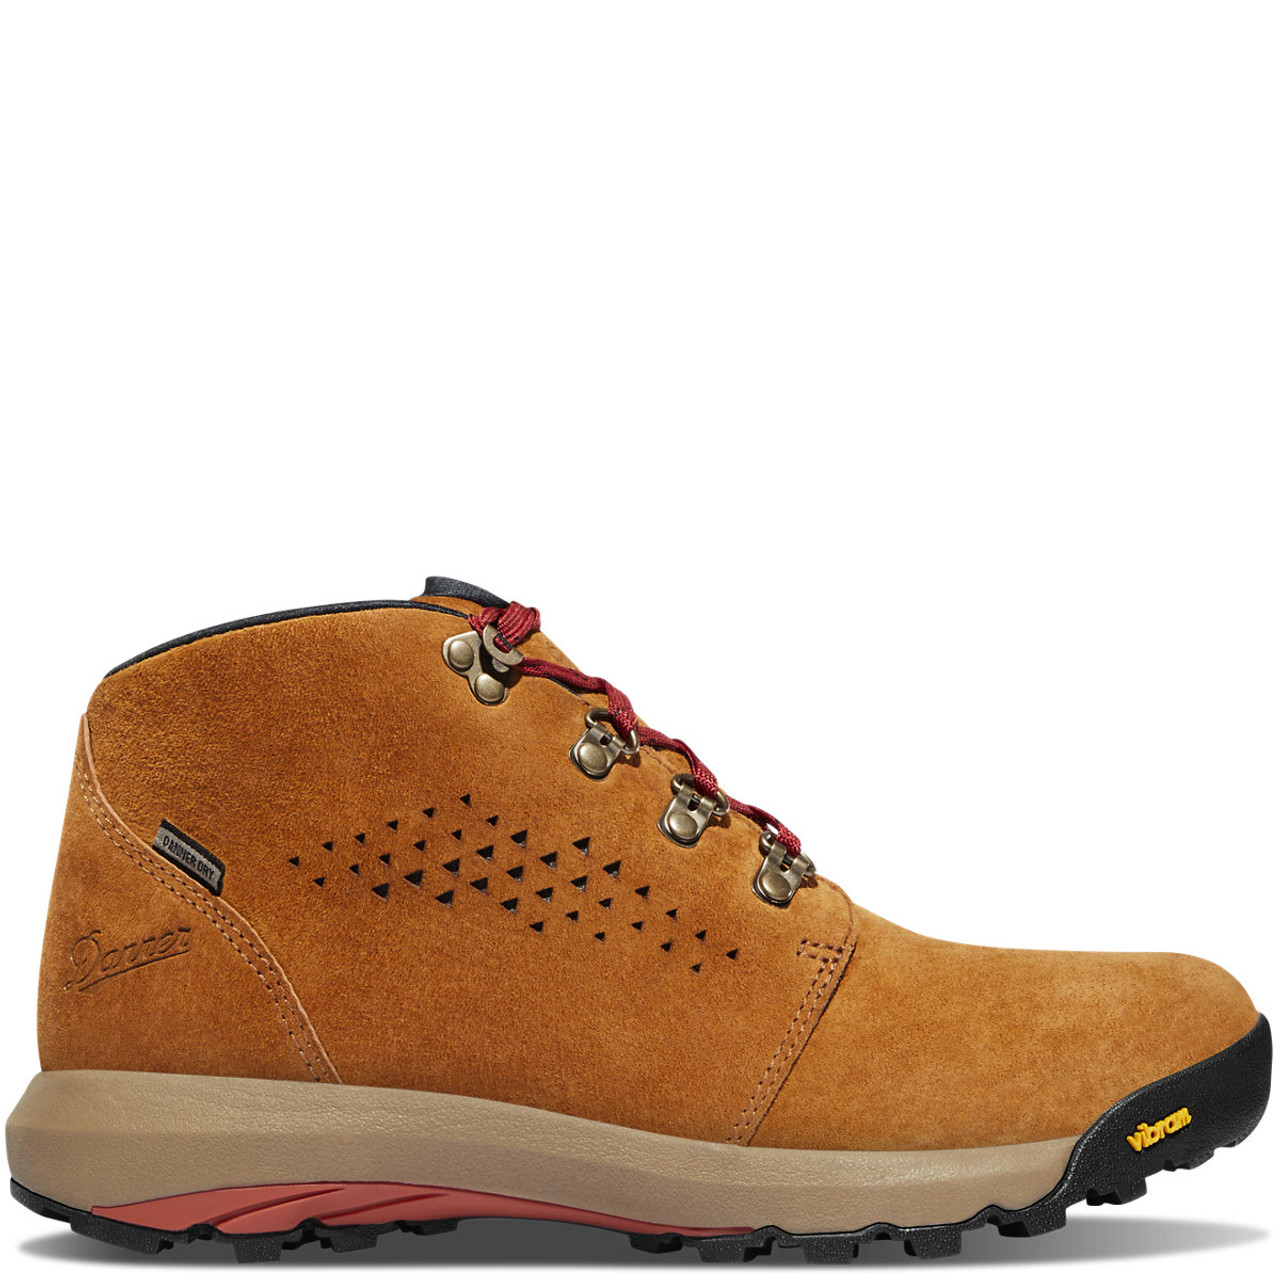 DANNER® INQUIRE CHUKKA WOMEN'S SIZING BROWN/RED LIFESTYLE BOOTS 64500